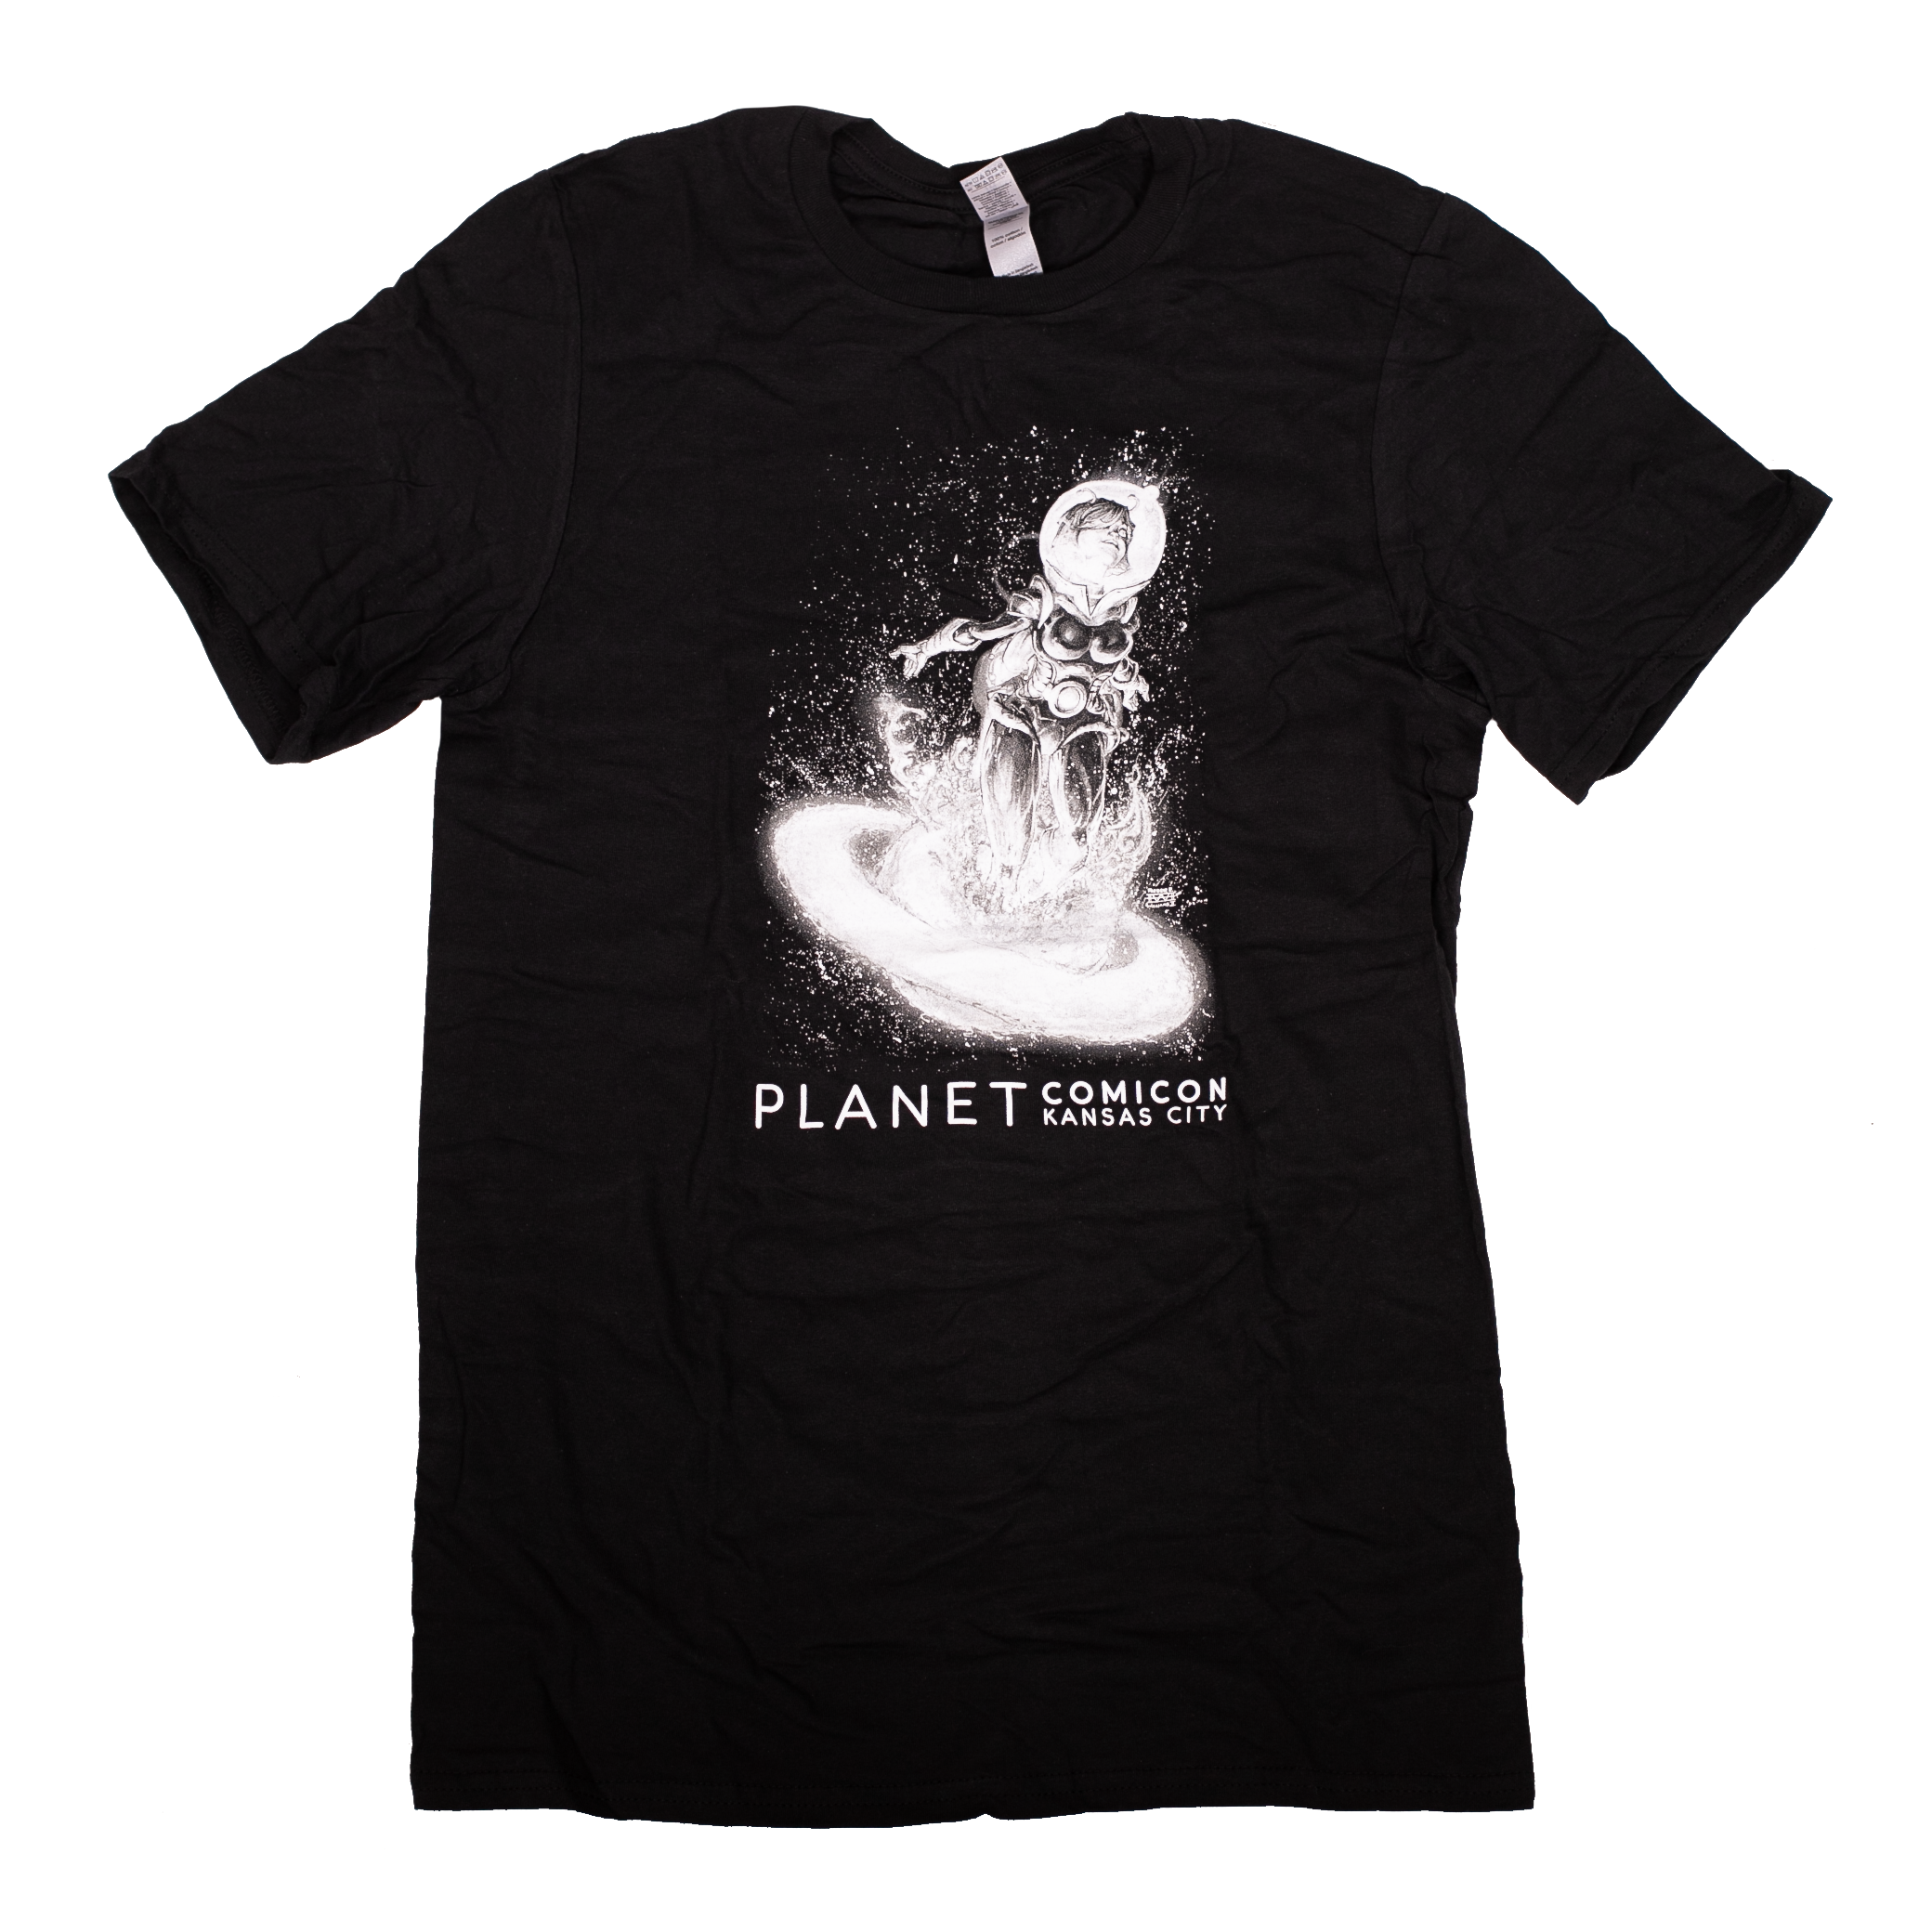 Planet Comicon | Glow-In-The-Dark Planet Girl T-Shirt